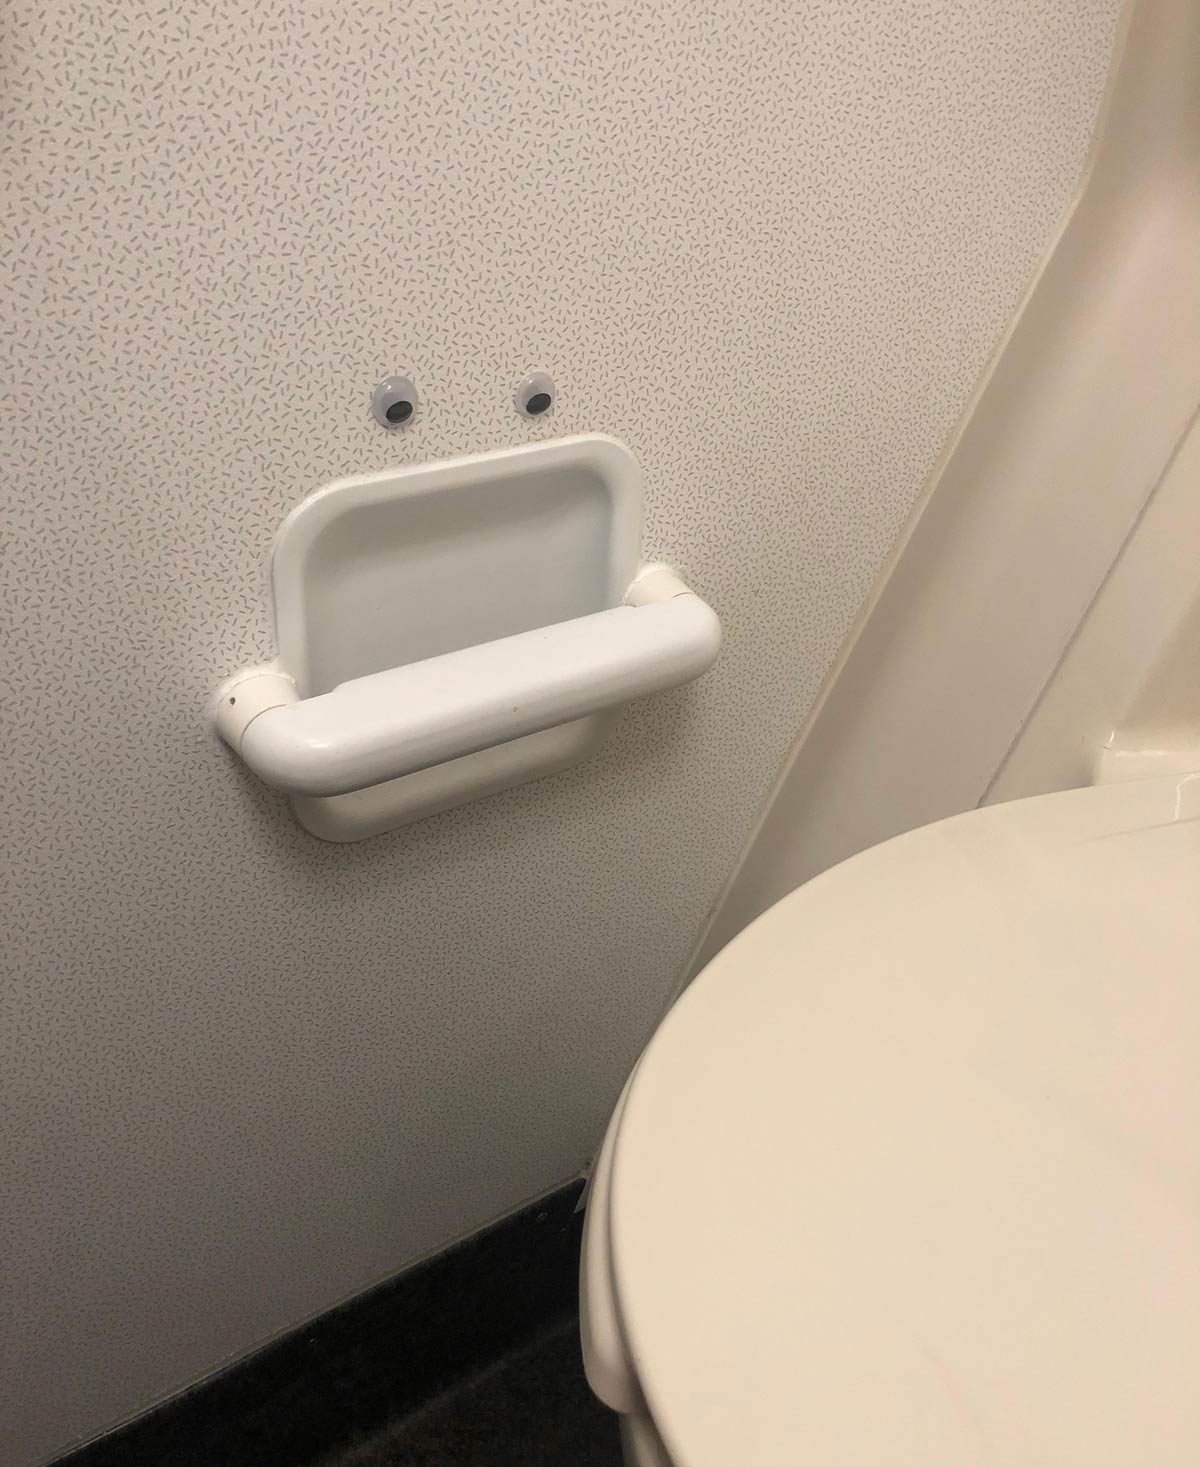 Saw this guy in the airplane bathroom today..